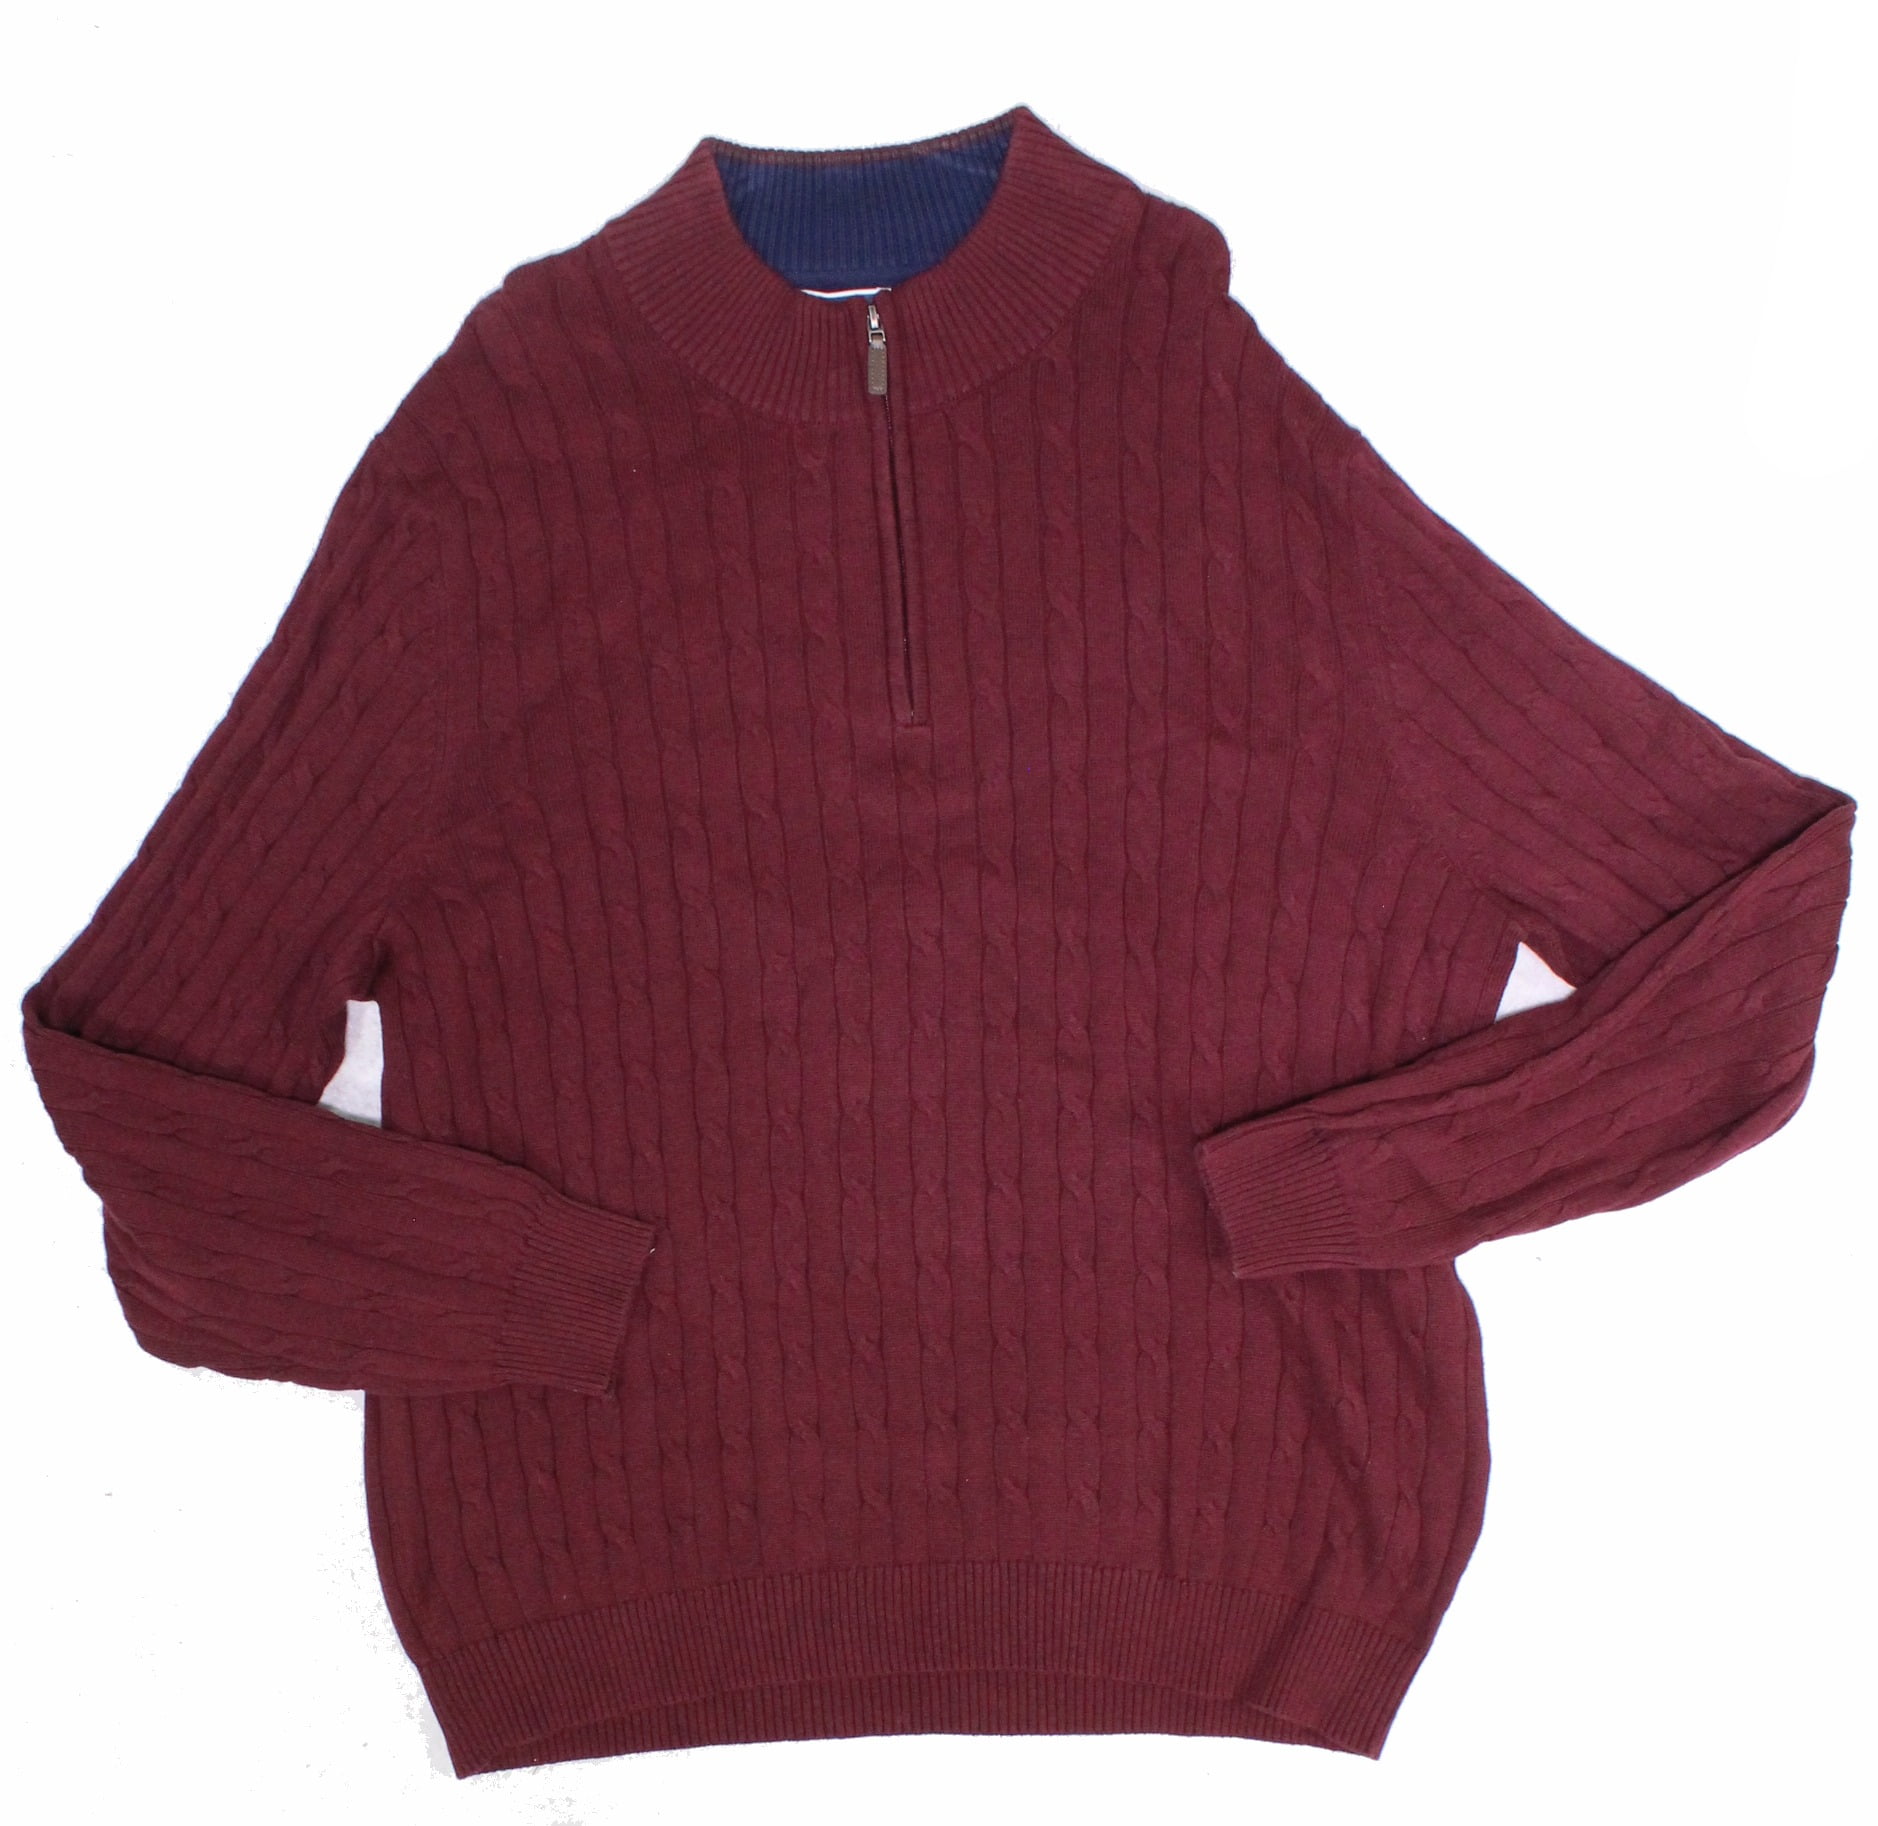 Club Room Sweaters - Mens Sweater Cranberry Medium 1/2 Zip Cable Knit M ...